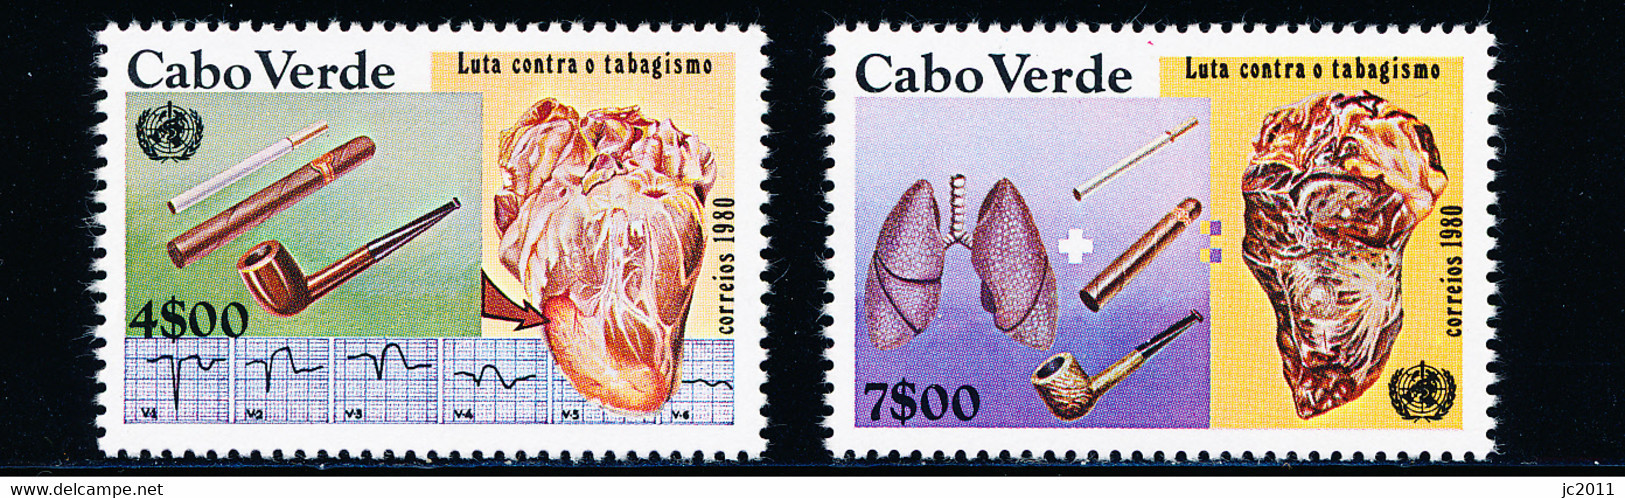 Cabo Verde - 1980 - Smoking / Fight Against - World Health Day - MNH - Islas De Cabo Verde